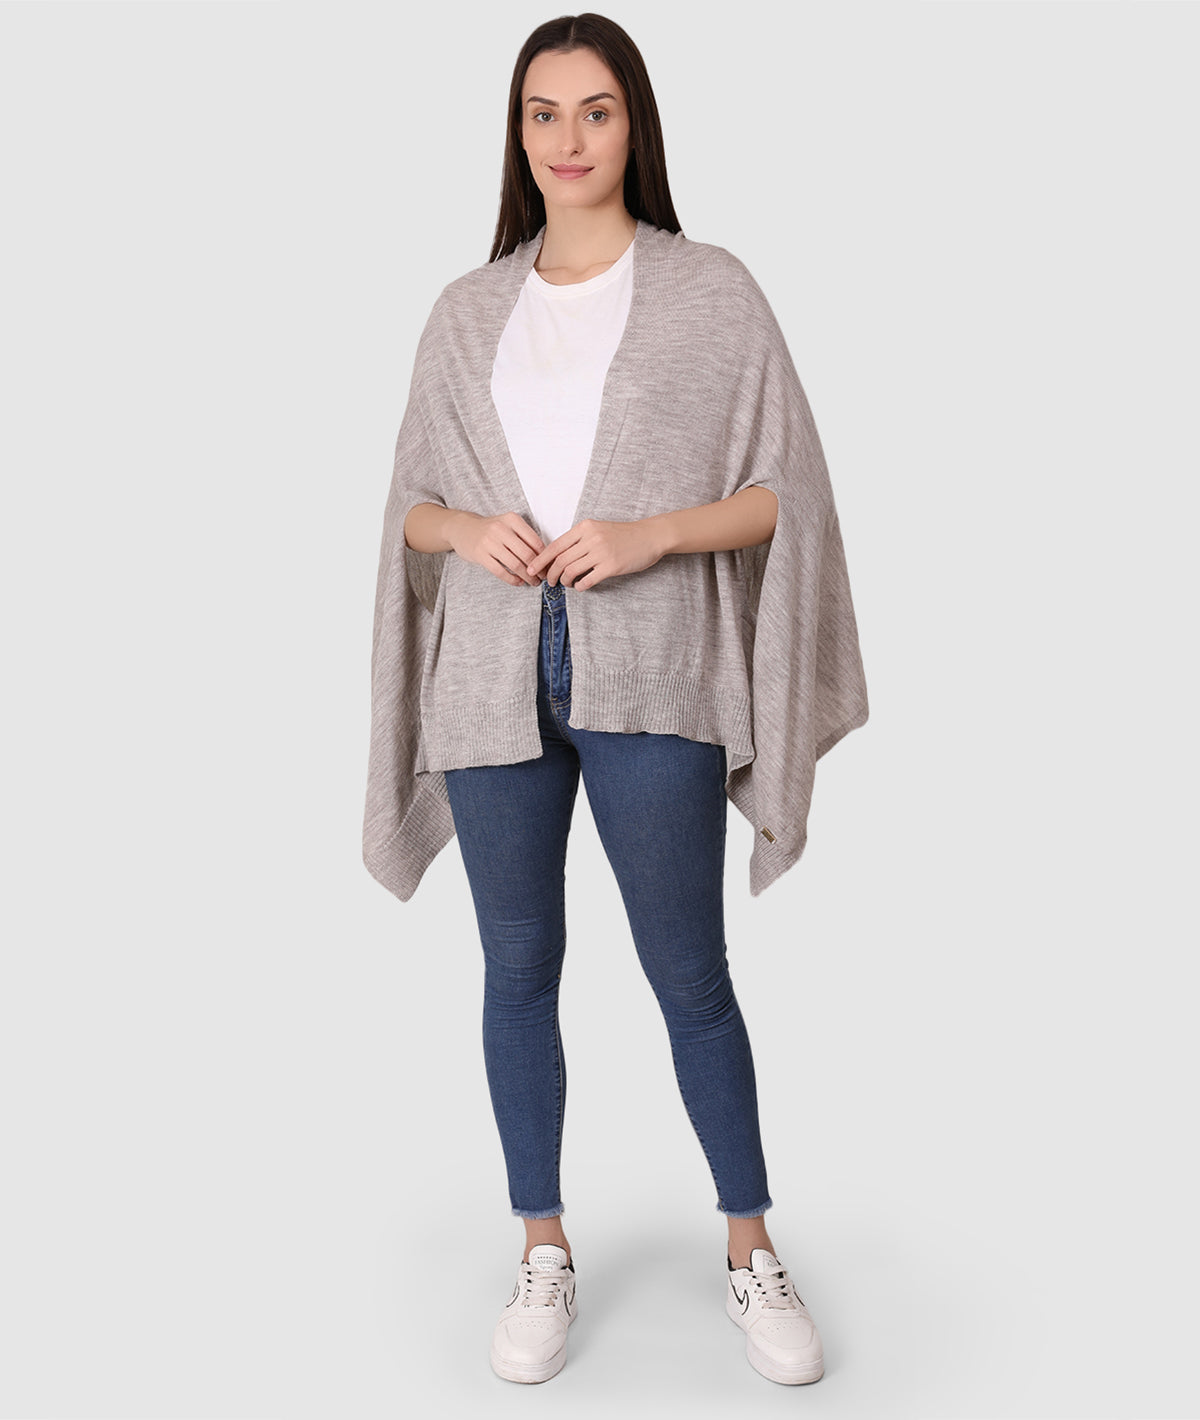 Palma Merino Wool Knitted Fashion Poncho / Cape for Everyday Chic Look (One Size Fits All) (Medium Fawn Mix)